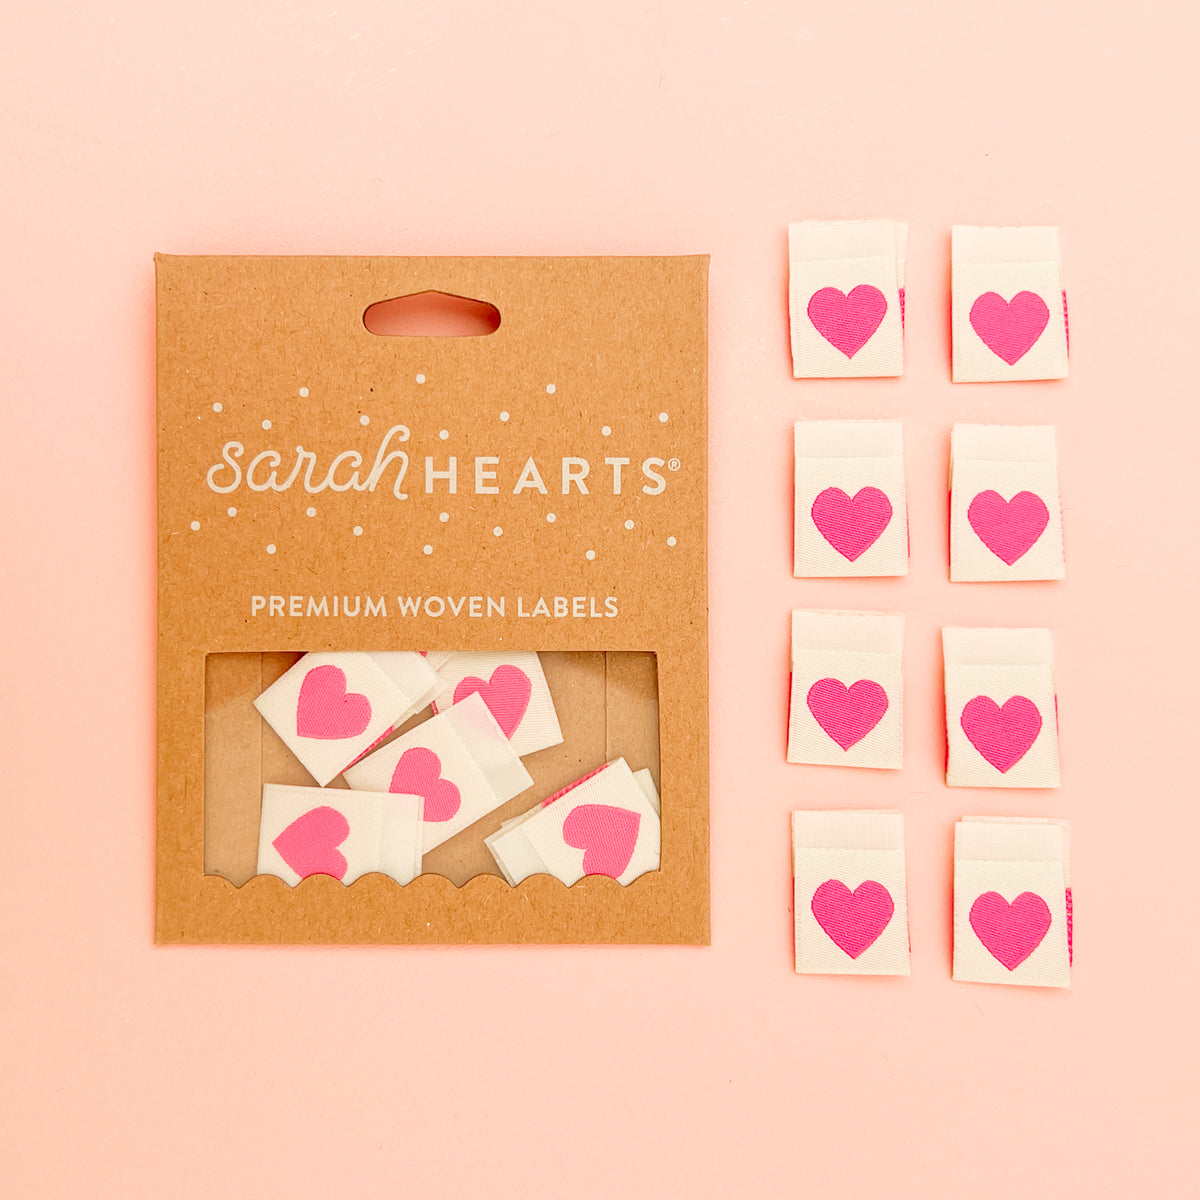 Sarah Hearts Quilt Label - Pink Hearts